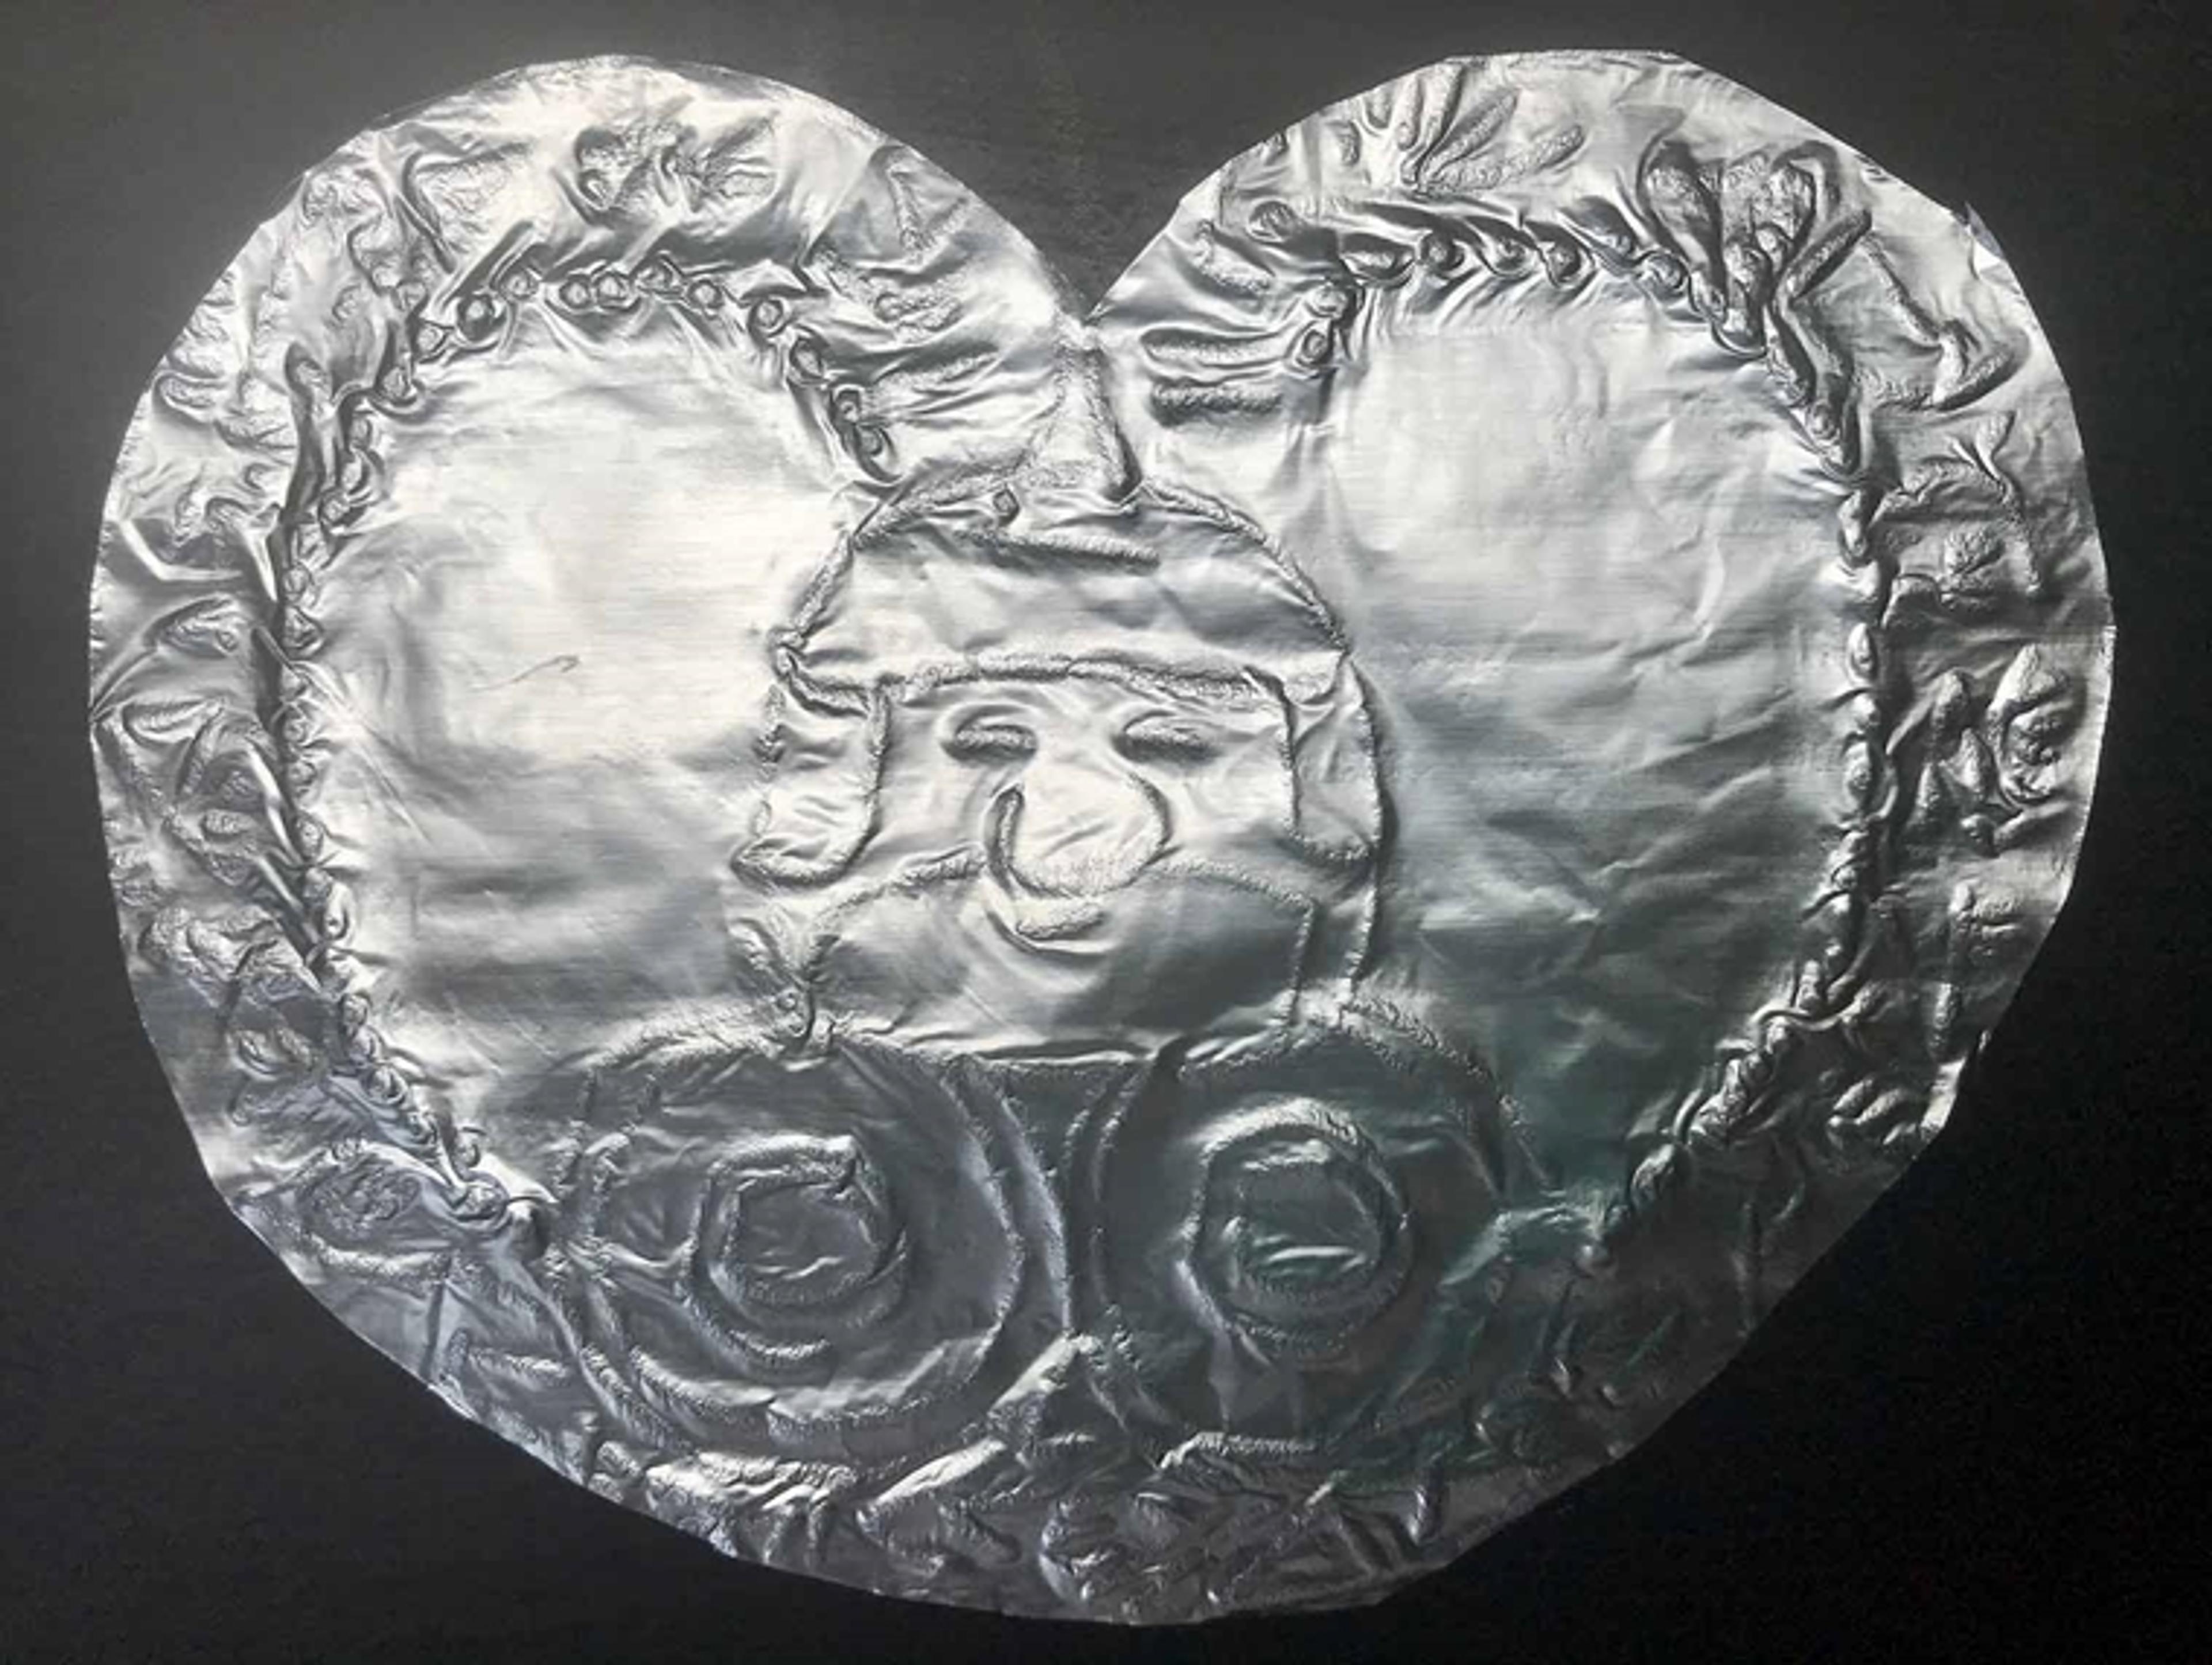 A heart-shaped tin foil ornament with a face of a man in the center with two circles below it.